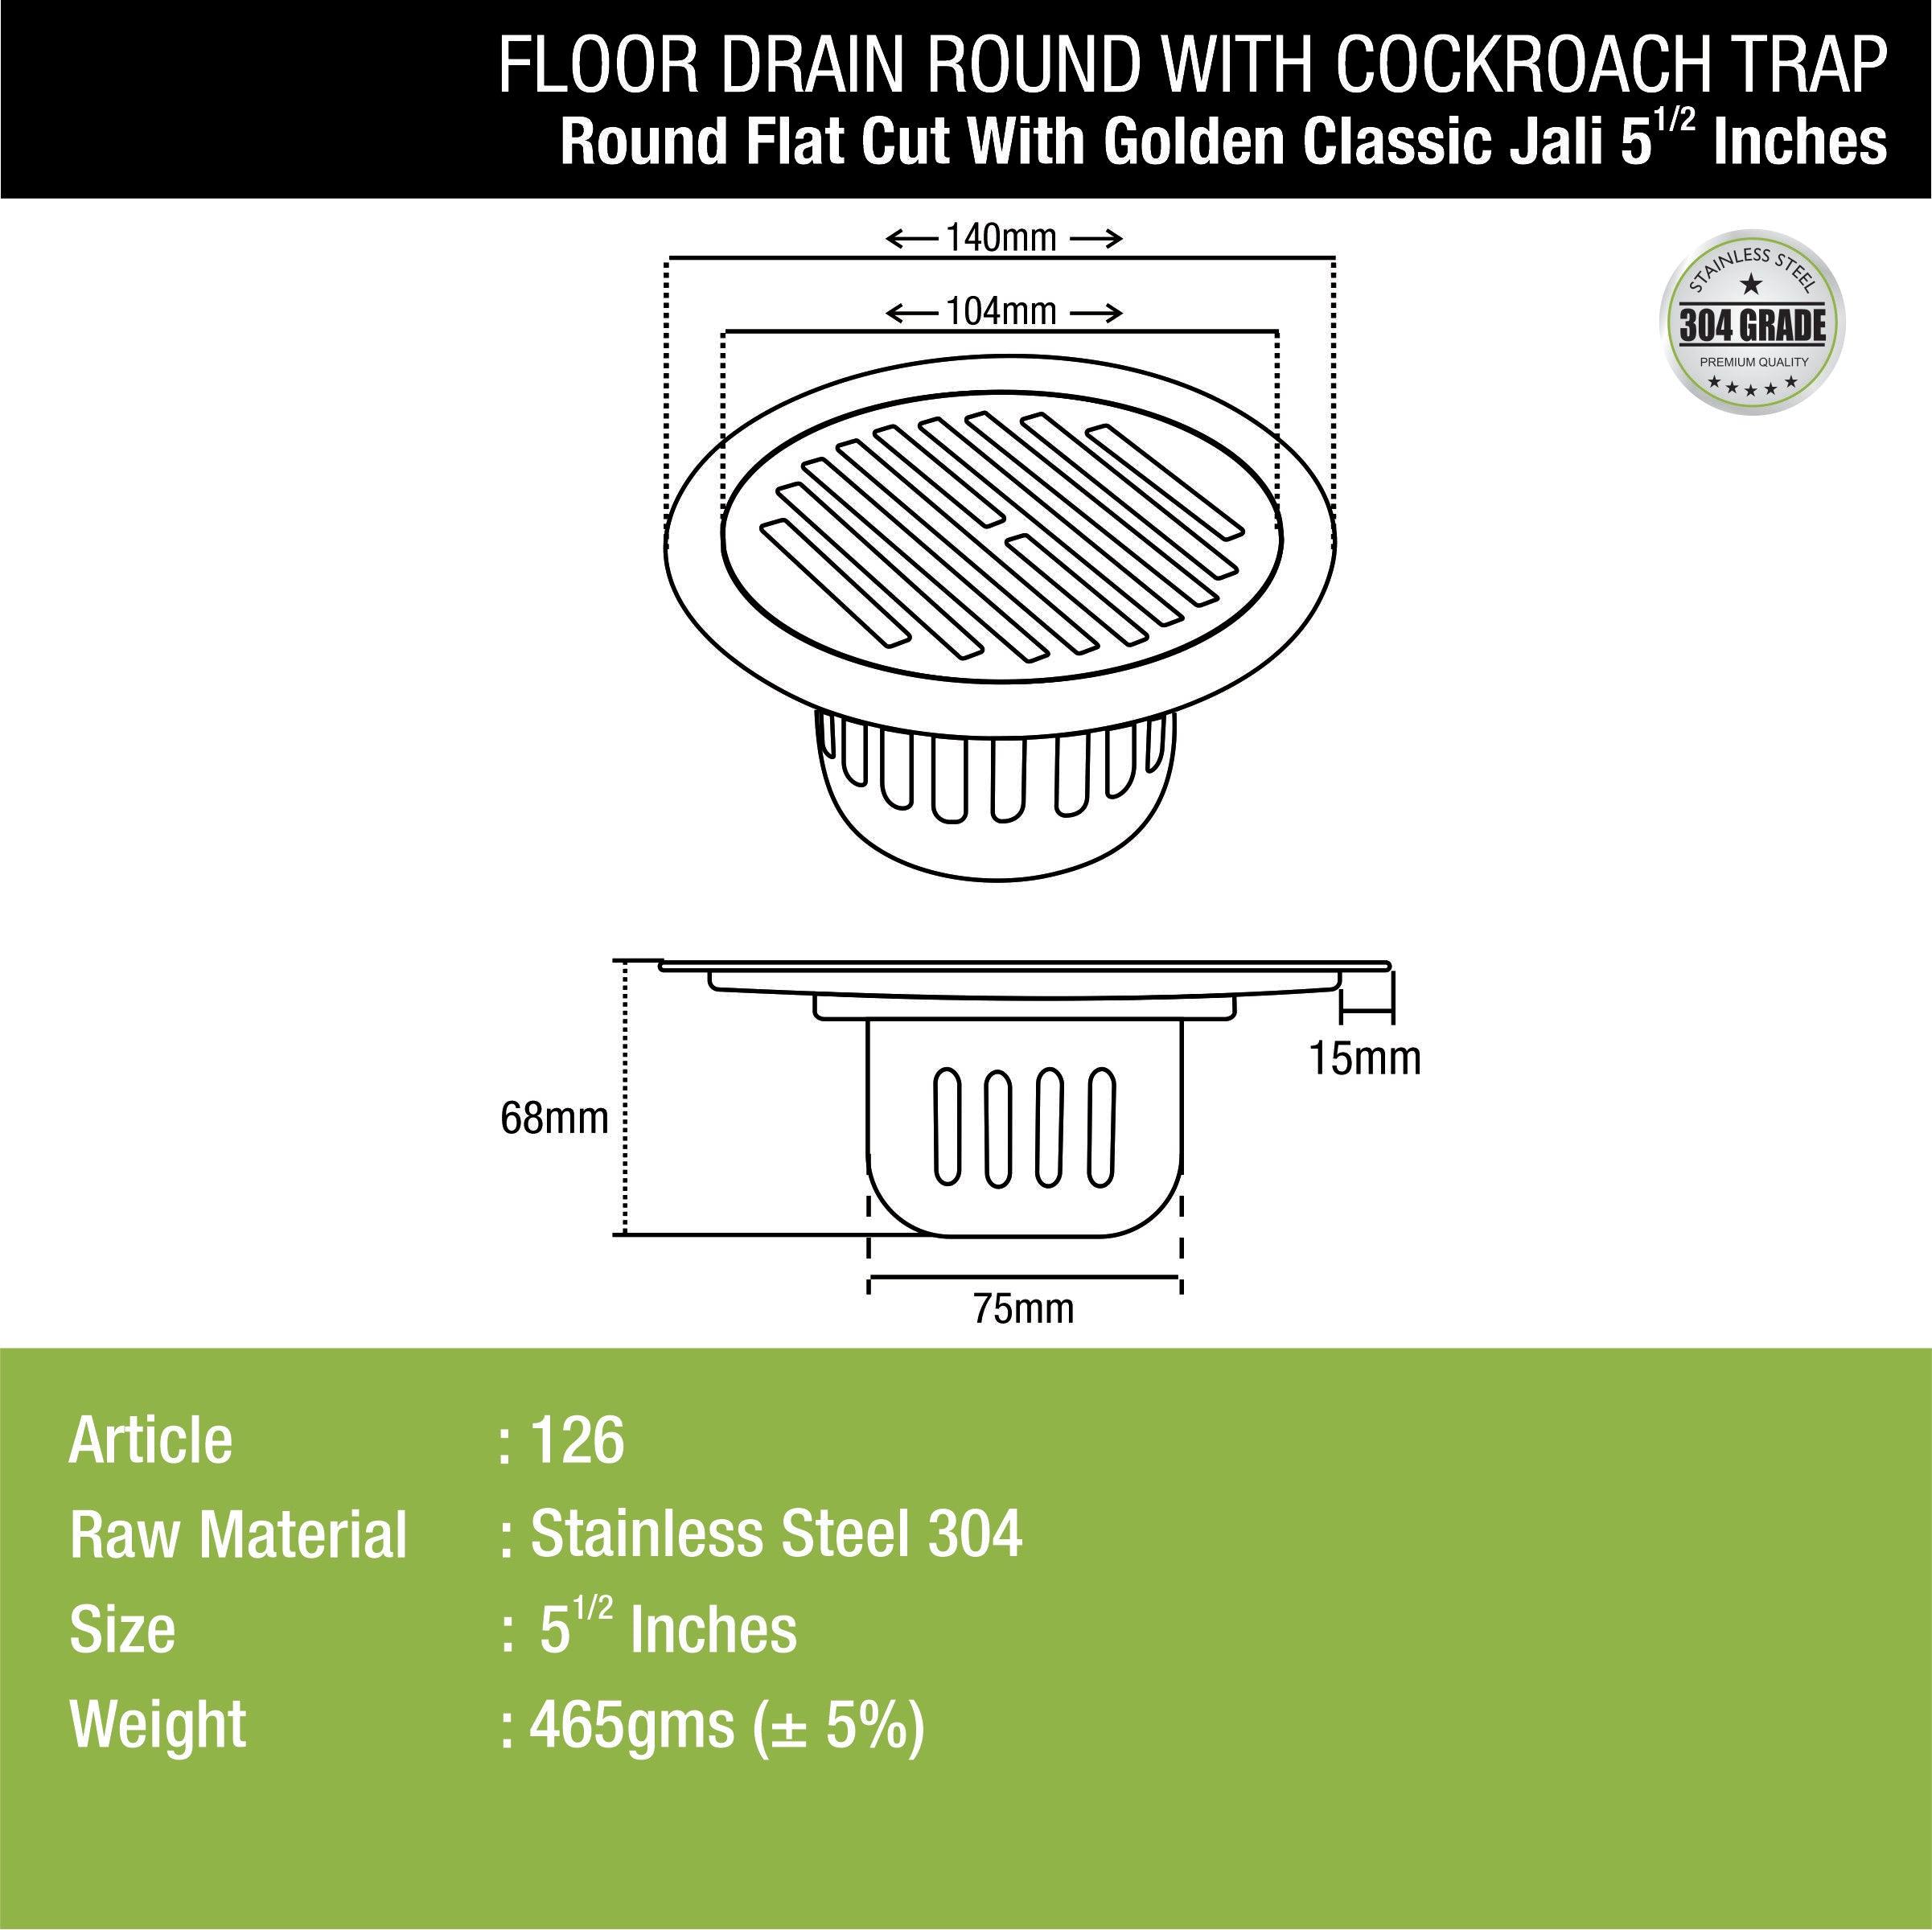 Golden Classic Jali Round Flat Cut Floor Drain (5.5 inches) with Cockroach Trap dimensions and sizes